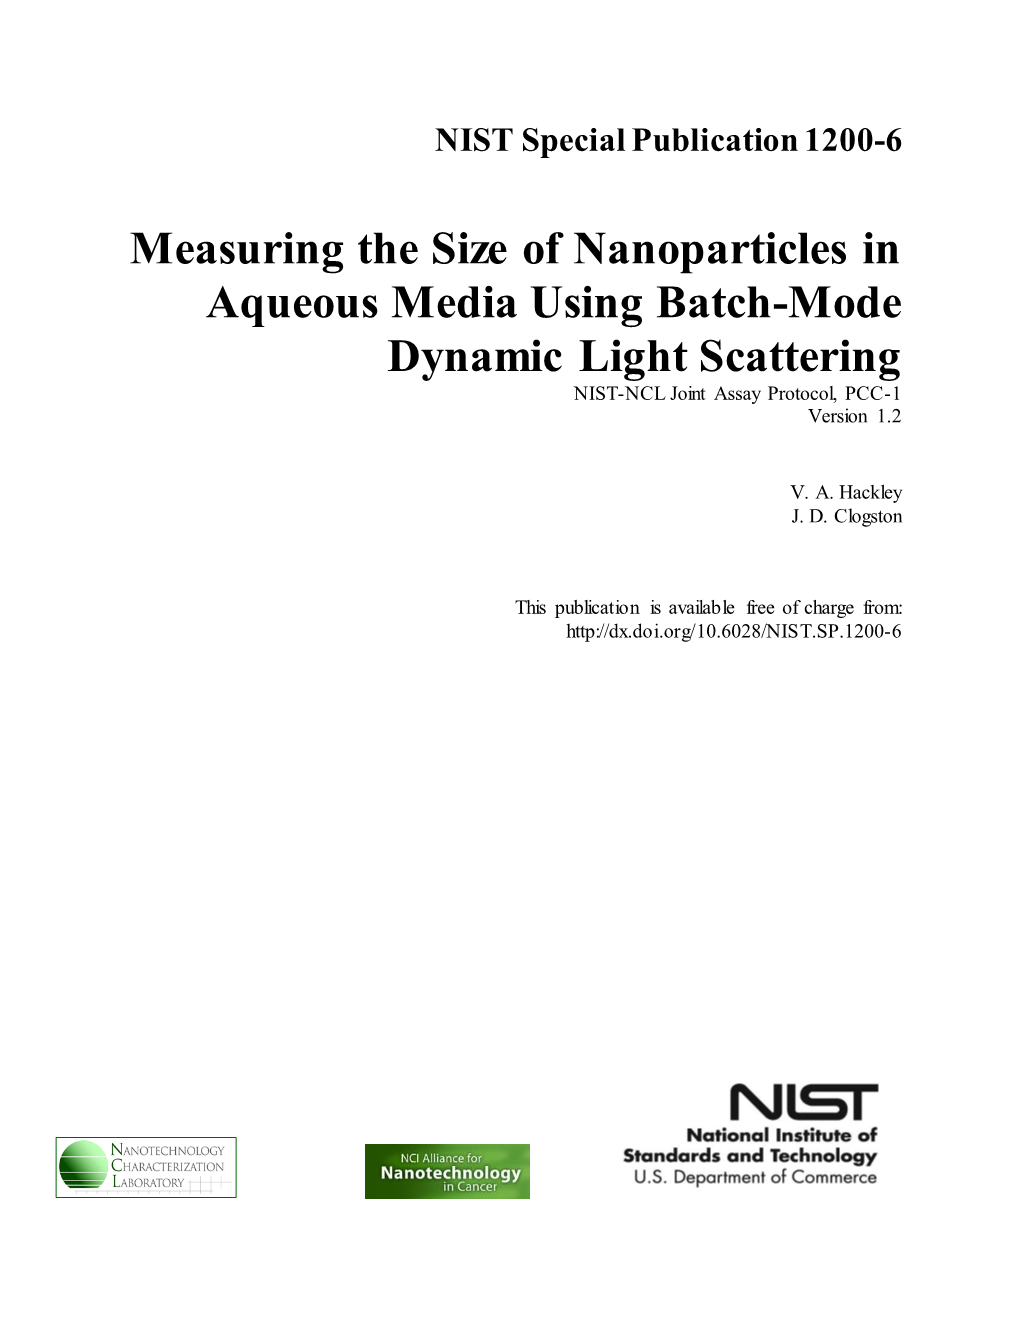 Measuring the Size of Nanoparticles in Aqueous Media Using Batch-Mode Dynamic Light Scattering NIST-NCL Joint Assay Protocol, PCC-1 Version 1.2